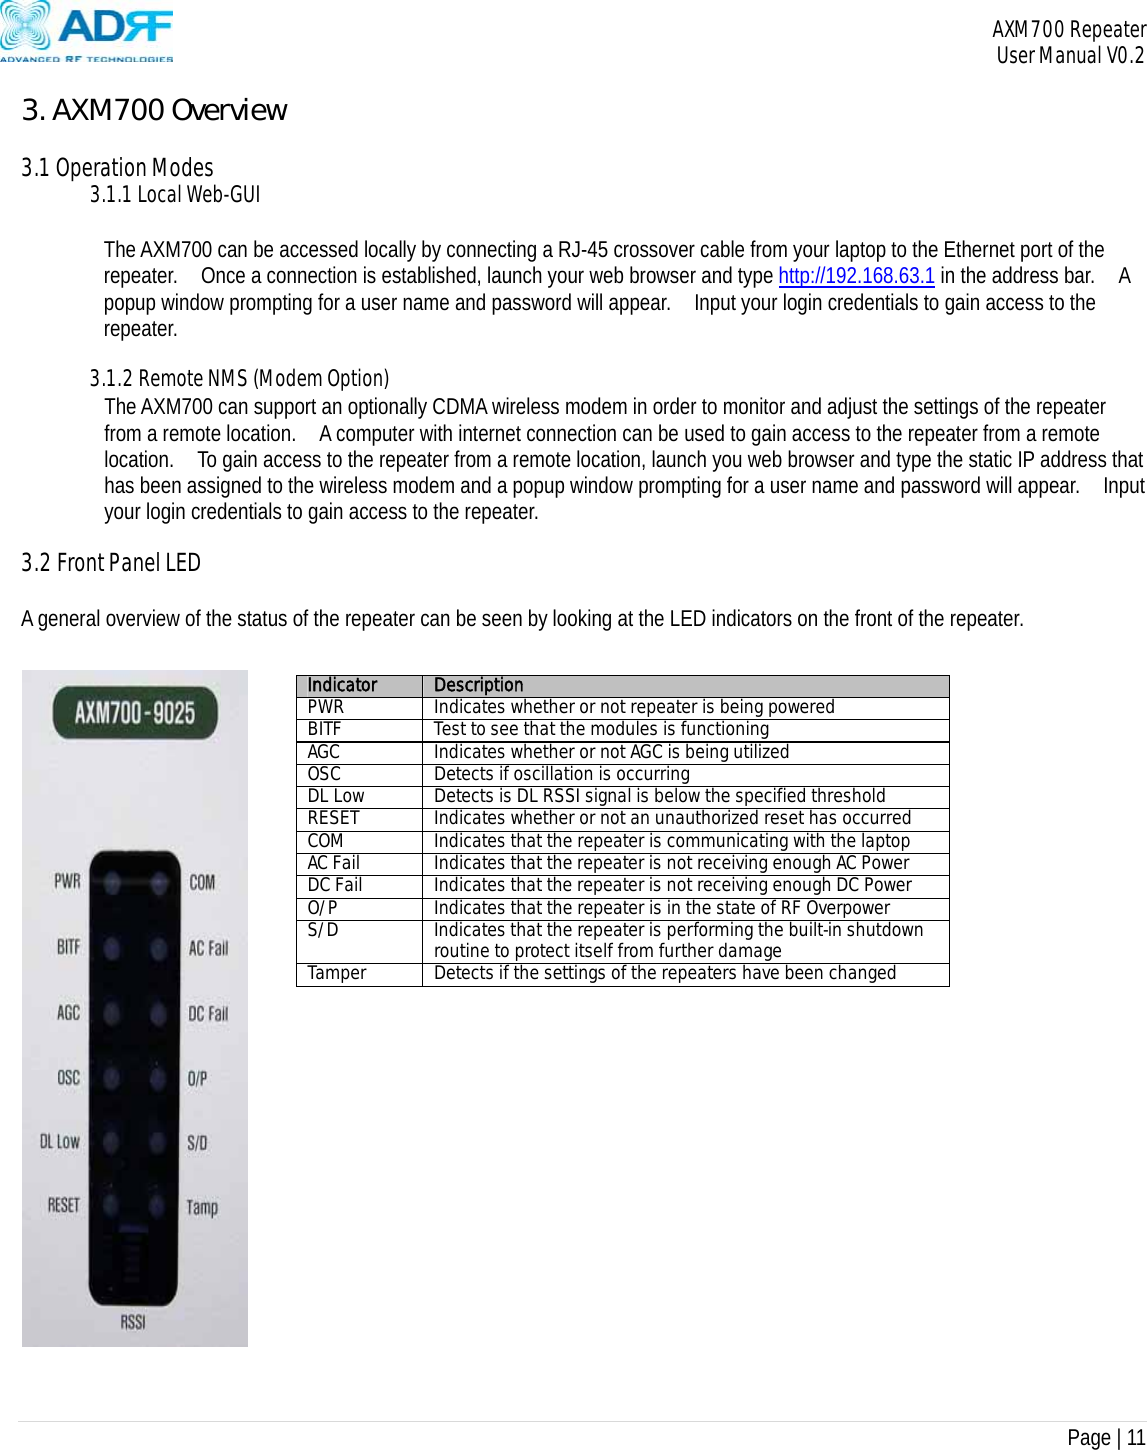 AXM700 Repeater     User Manual V0.2  Page | 11    3. AXM700 Overview  3.1 Operation Modes 3.1.1 Local Web-GUI  The AXM700 can be accessed locally by connecting a RJ-45 crossover cable from your laptop to the Ethernet port of the repeater.    Once a connection is established, launch your web browser and type http://192.168.63.1 in the address bar.    A popup window prompting for a user name and password will appear.    Input your login credentials to gain access to the repeater.    3.1.2 Remote NMS (Modem Option) The AXM700 can support an optionally CDMA wireless modem in order to monitor and adjust the settings of the repeater from a remote location.    A computer with internet connection can be used to gain access to the repeater from a remote location.    To gain access to the repeater from a remote location, launch you web browser and type the static IP address that has been assigned to the wireless modem and a popup window prompting for a user name and password will appear.    Input your login credentials to gain access to the repeater.  3.2 Front Panel LED  A general overview of the status of the repeater can be seen by looking at the LED indicators on the front of the repeater.       Indicator  DescriptionPWR  Indicates whether or not repeater is being poweredBITF  Test to see that the modules is functioningAGC  Indicates whether or not AGC is being utilizedOSC  Detects if oscillation is occurringDL Low  Detects is DL RSSI signal is below the specified threshold RESET  Indicates whether or not an unauthorized reset has occurred COM  Indicates that the repeater is communicating with the laptop AC Fail  Indicates that the repeater is not receiving enough AC Power DC Fail  Indicates that the repeater is not receiving enough DC Power O/P  Indicates that the repeater is in the state of RF Overpower S/D  Indicates that the repeater is performing the built-in shutdown routine to protect itself from further damage Tamper  Detects if the settings of the repeaters have been changed 